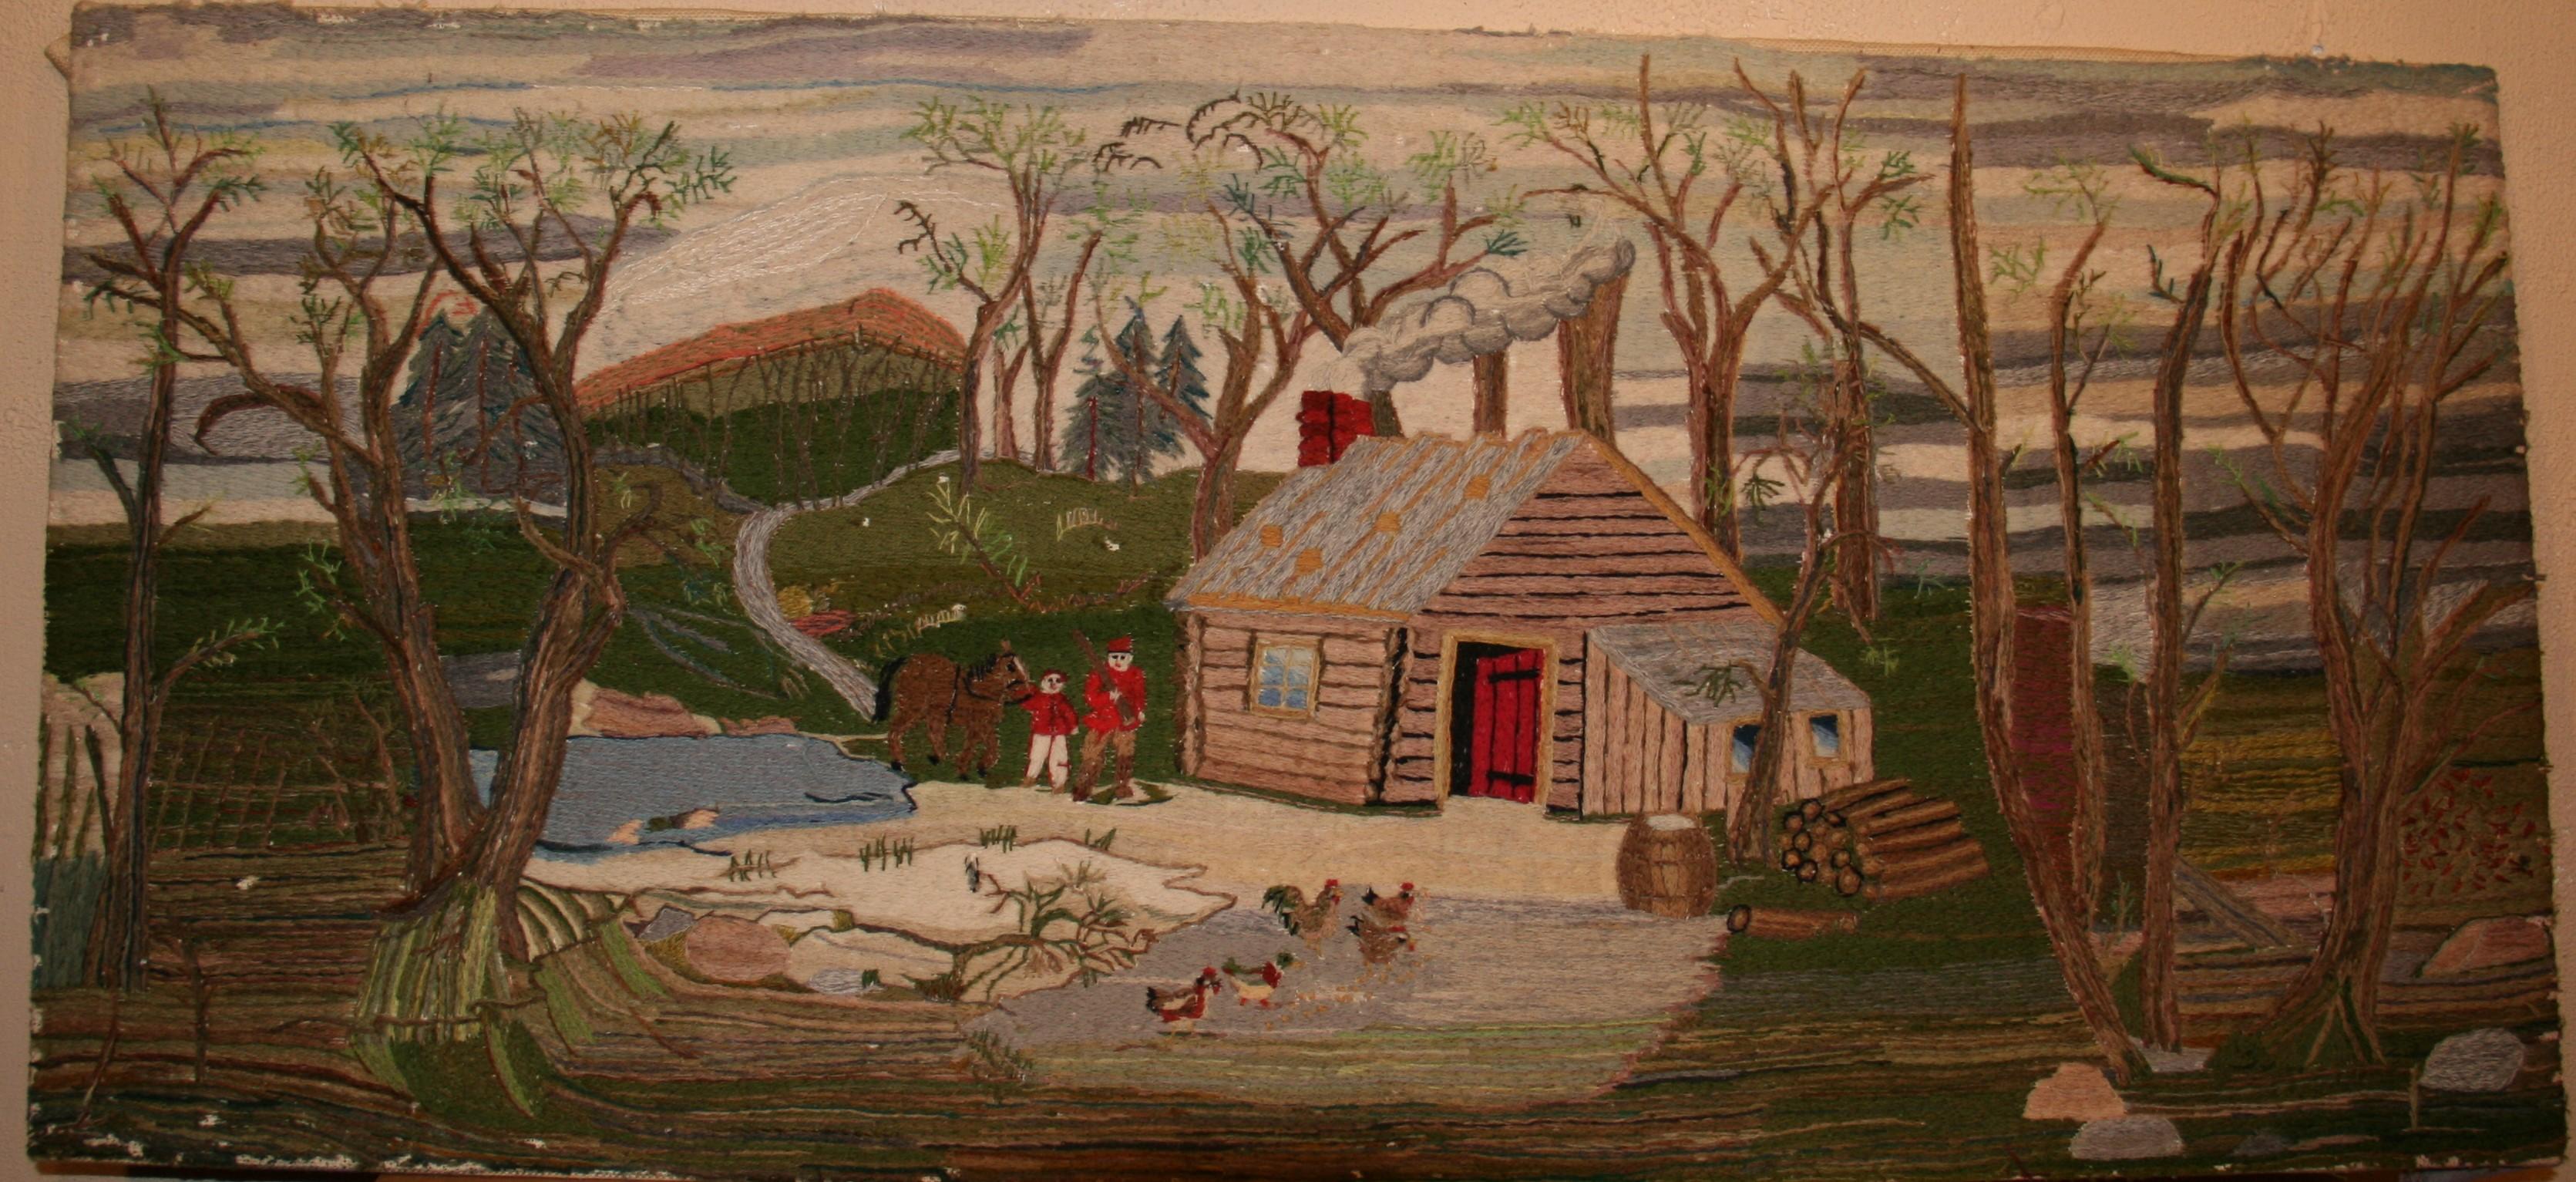 3-1029 Embroidered Folk Art wall hanging applied to wood board.
A home in the wilderness signed by the maker.